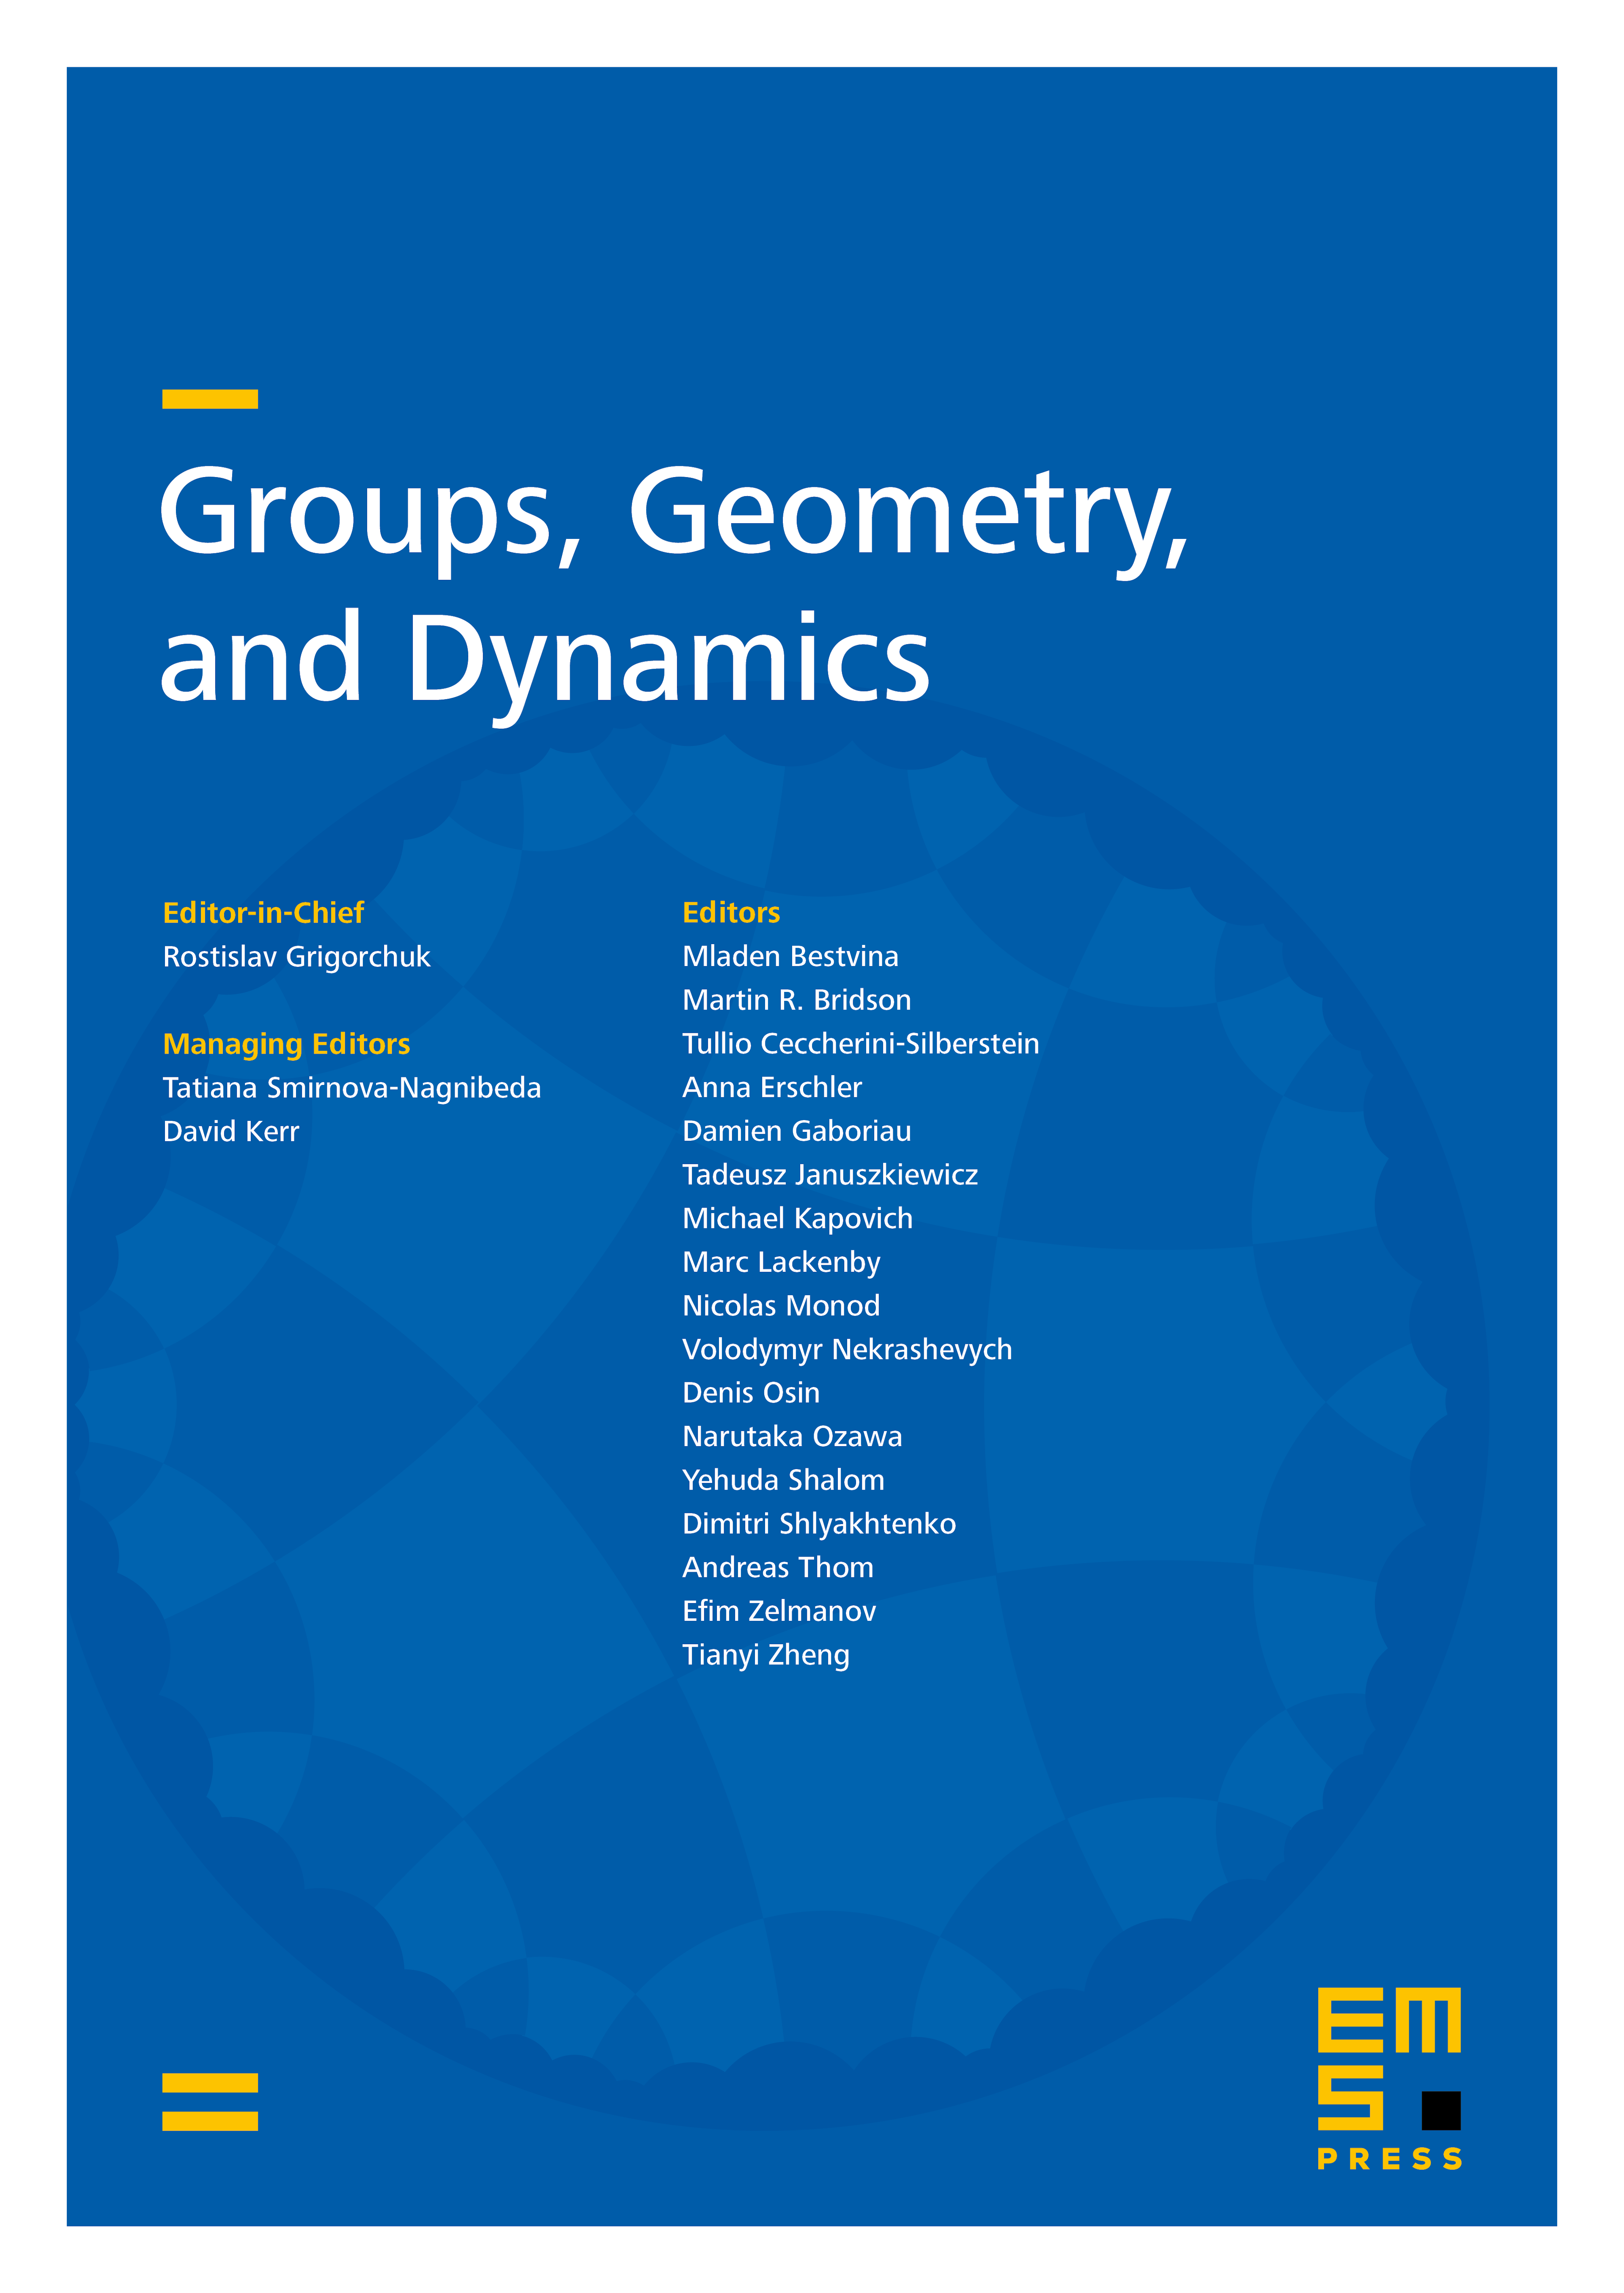 Realization of aperiodic subshifts and uniform densities in groups cover